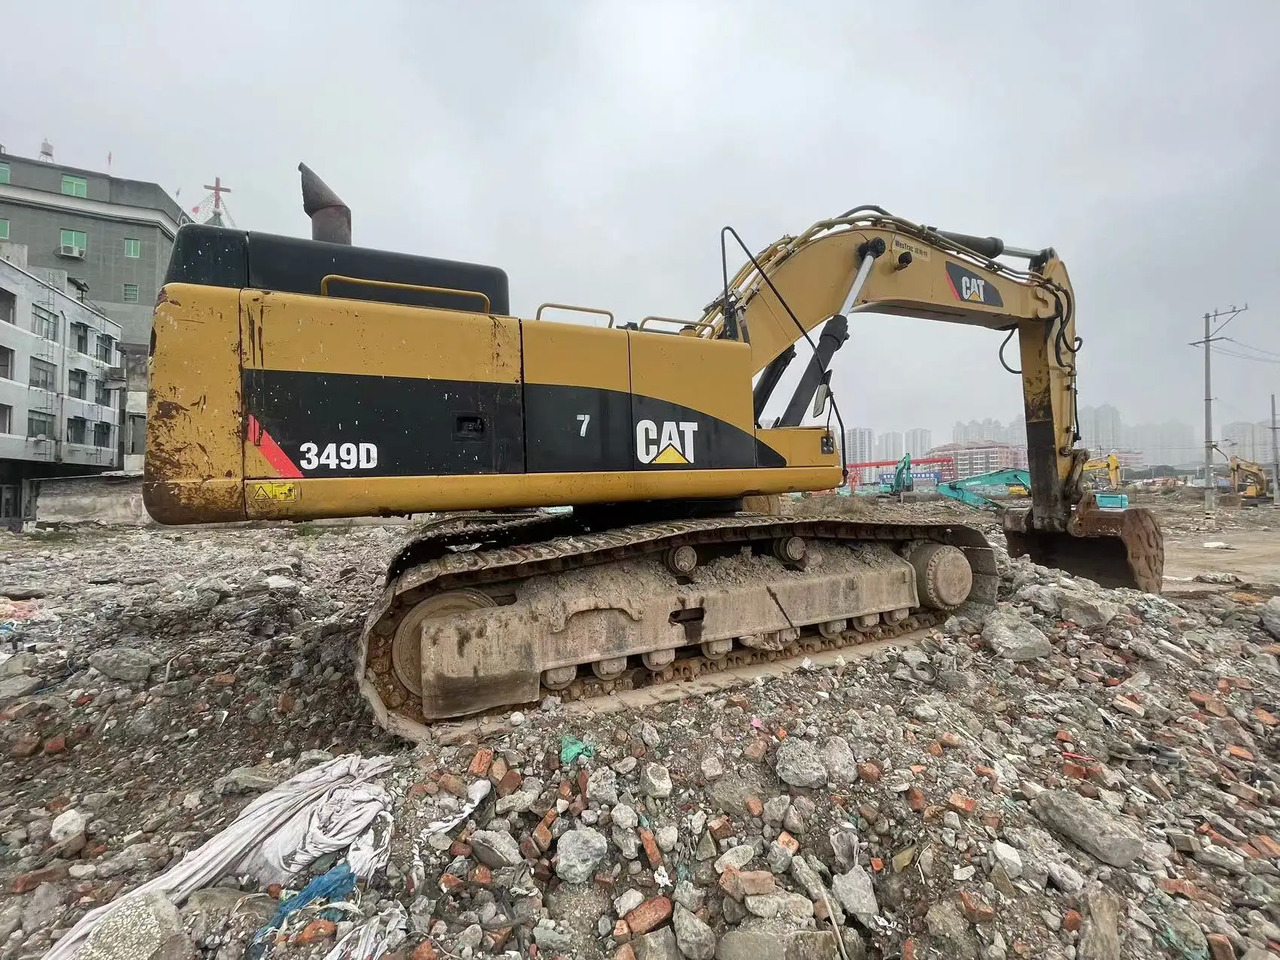 Telakaivukone Heavy Duty Caterpillar Digging Machinery Excellent Working Condition Used Cat 349d Excavator In Shanghai: kuva Telakaivukone Heavy Duty Caterpillar Digging Machinery Excellent Working Condition Used Cat 349d Excavator In Shanghai